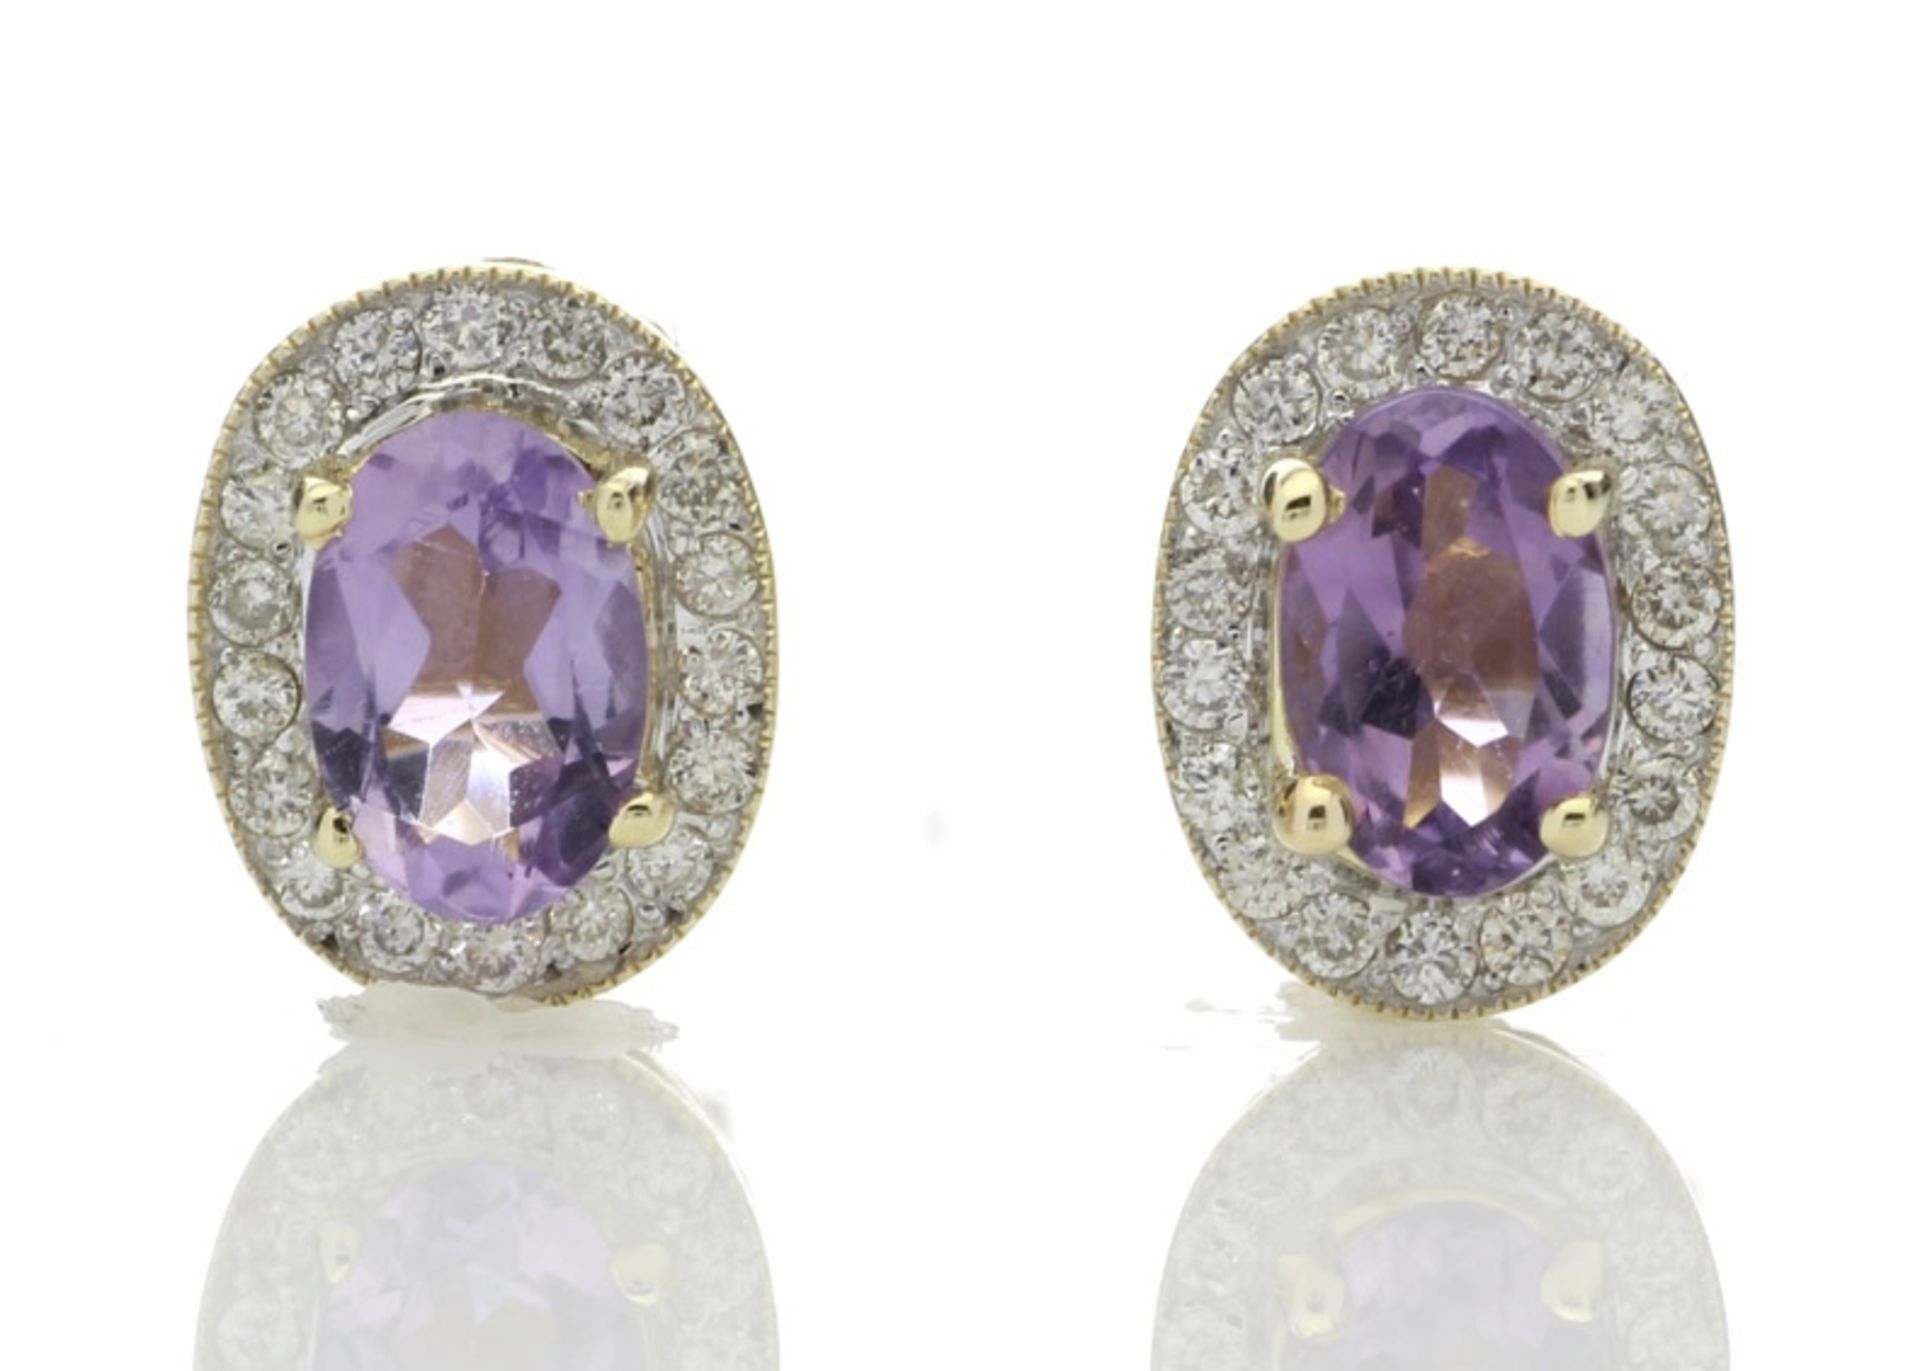 9ct Yellow Gold Amethyst and Diamond Cluster Earring (A0.86) 0.18 Carats - Valued By GIE £2,855.00 -